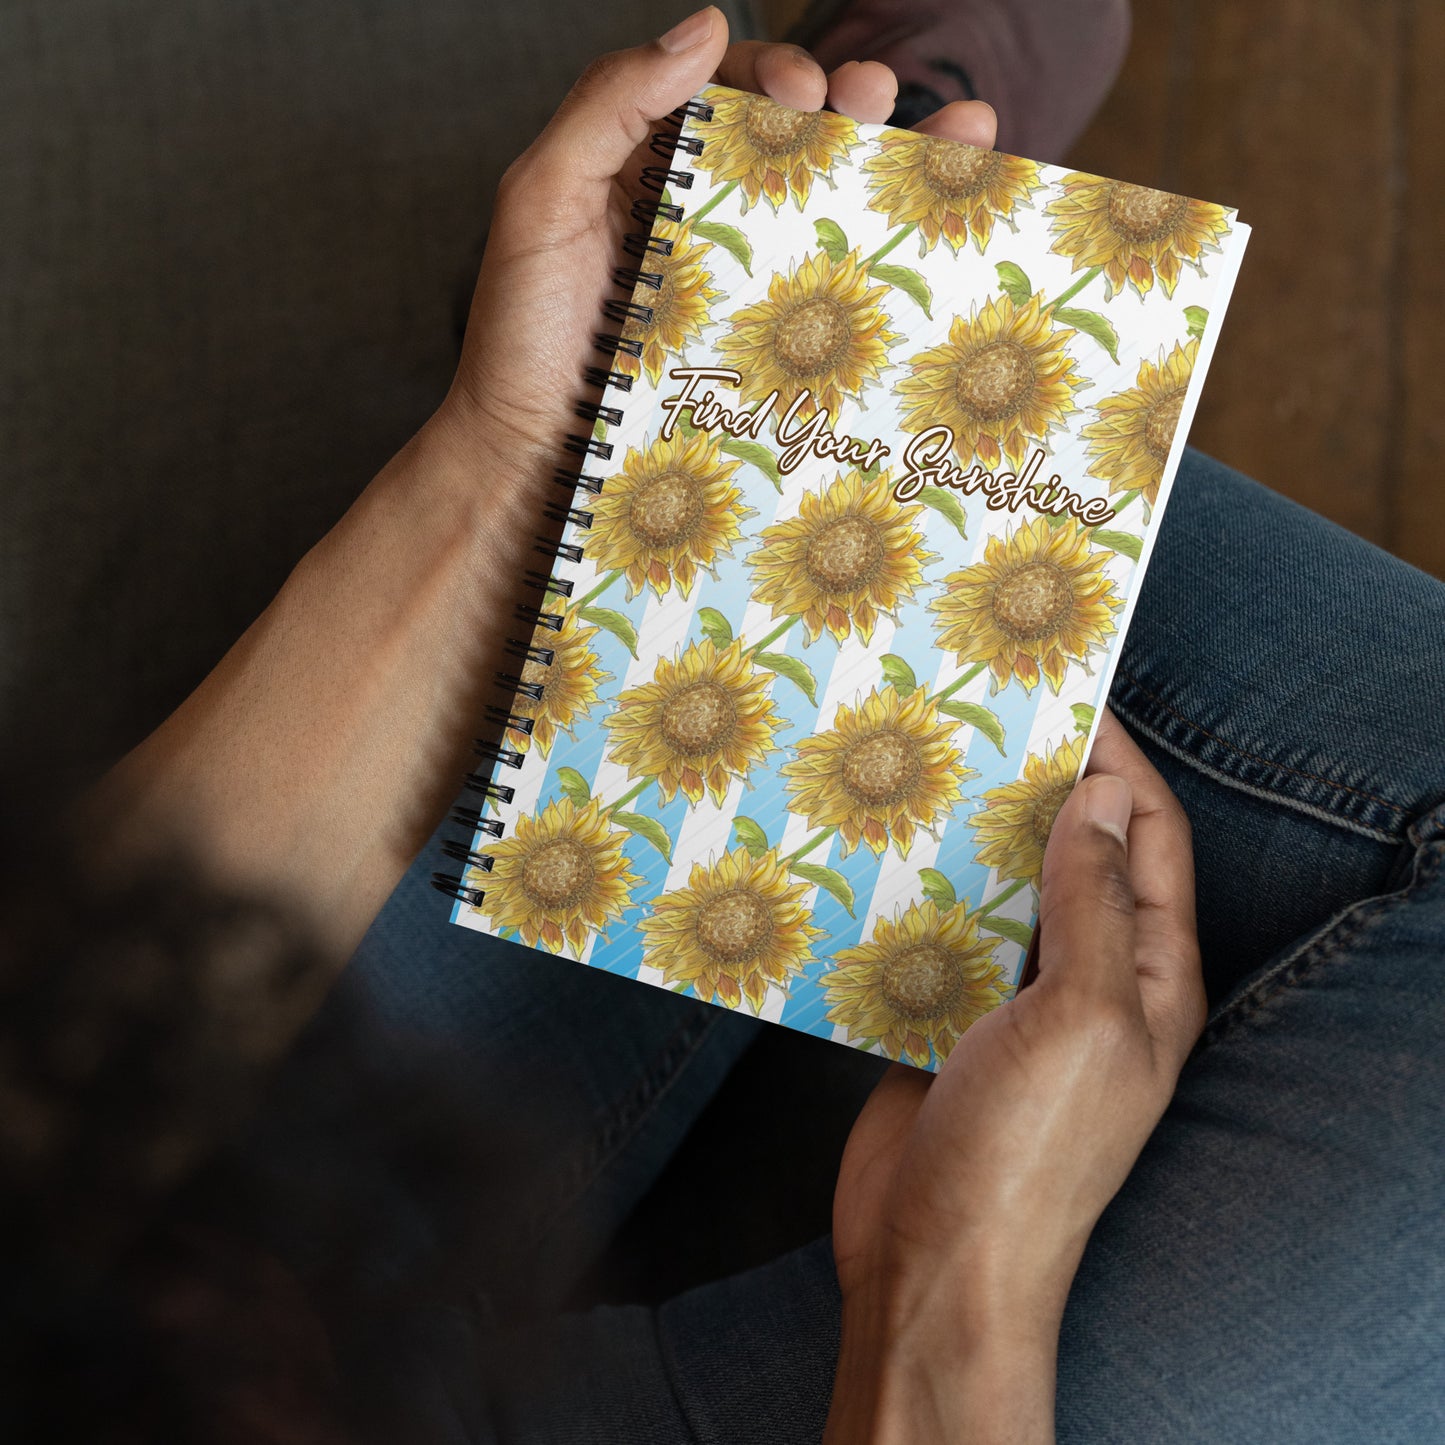 Spiral bound notebook with soft touch cover and 140 dotted pages. Cover features a pattern of watercolor sunflowers and blue and white stripes. Front has inspirational phrase "find your sunshine." Measures 5.5 inches by 8.5 inches. Shown in the hands of a model.